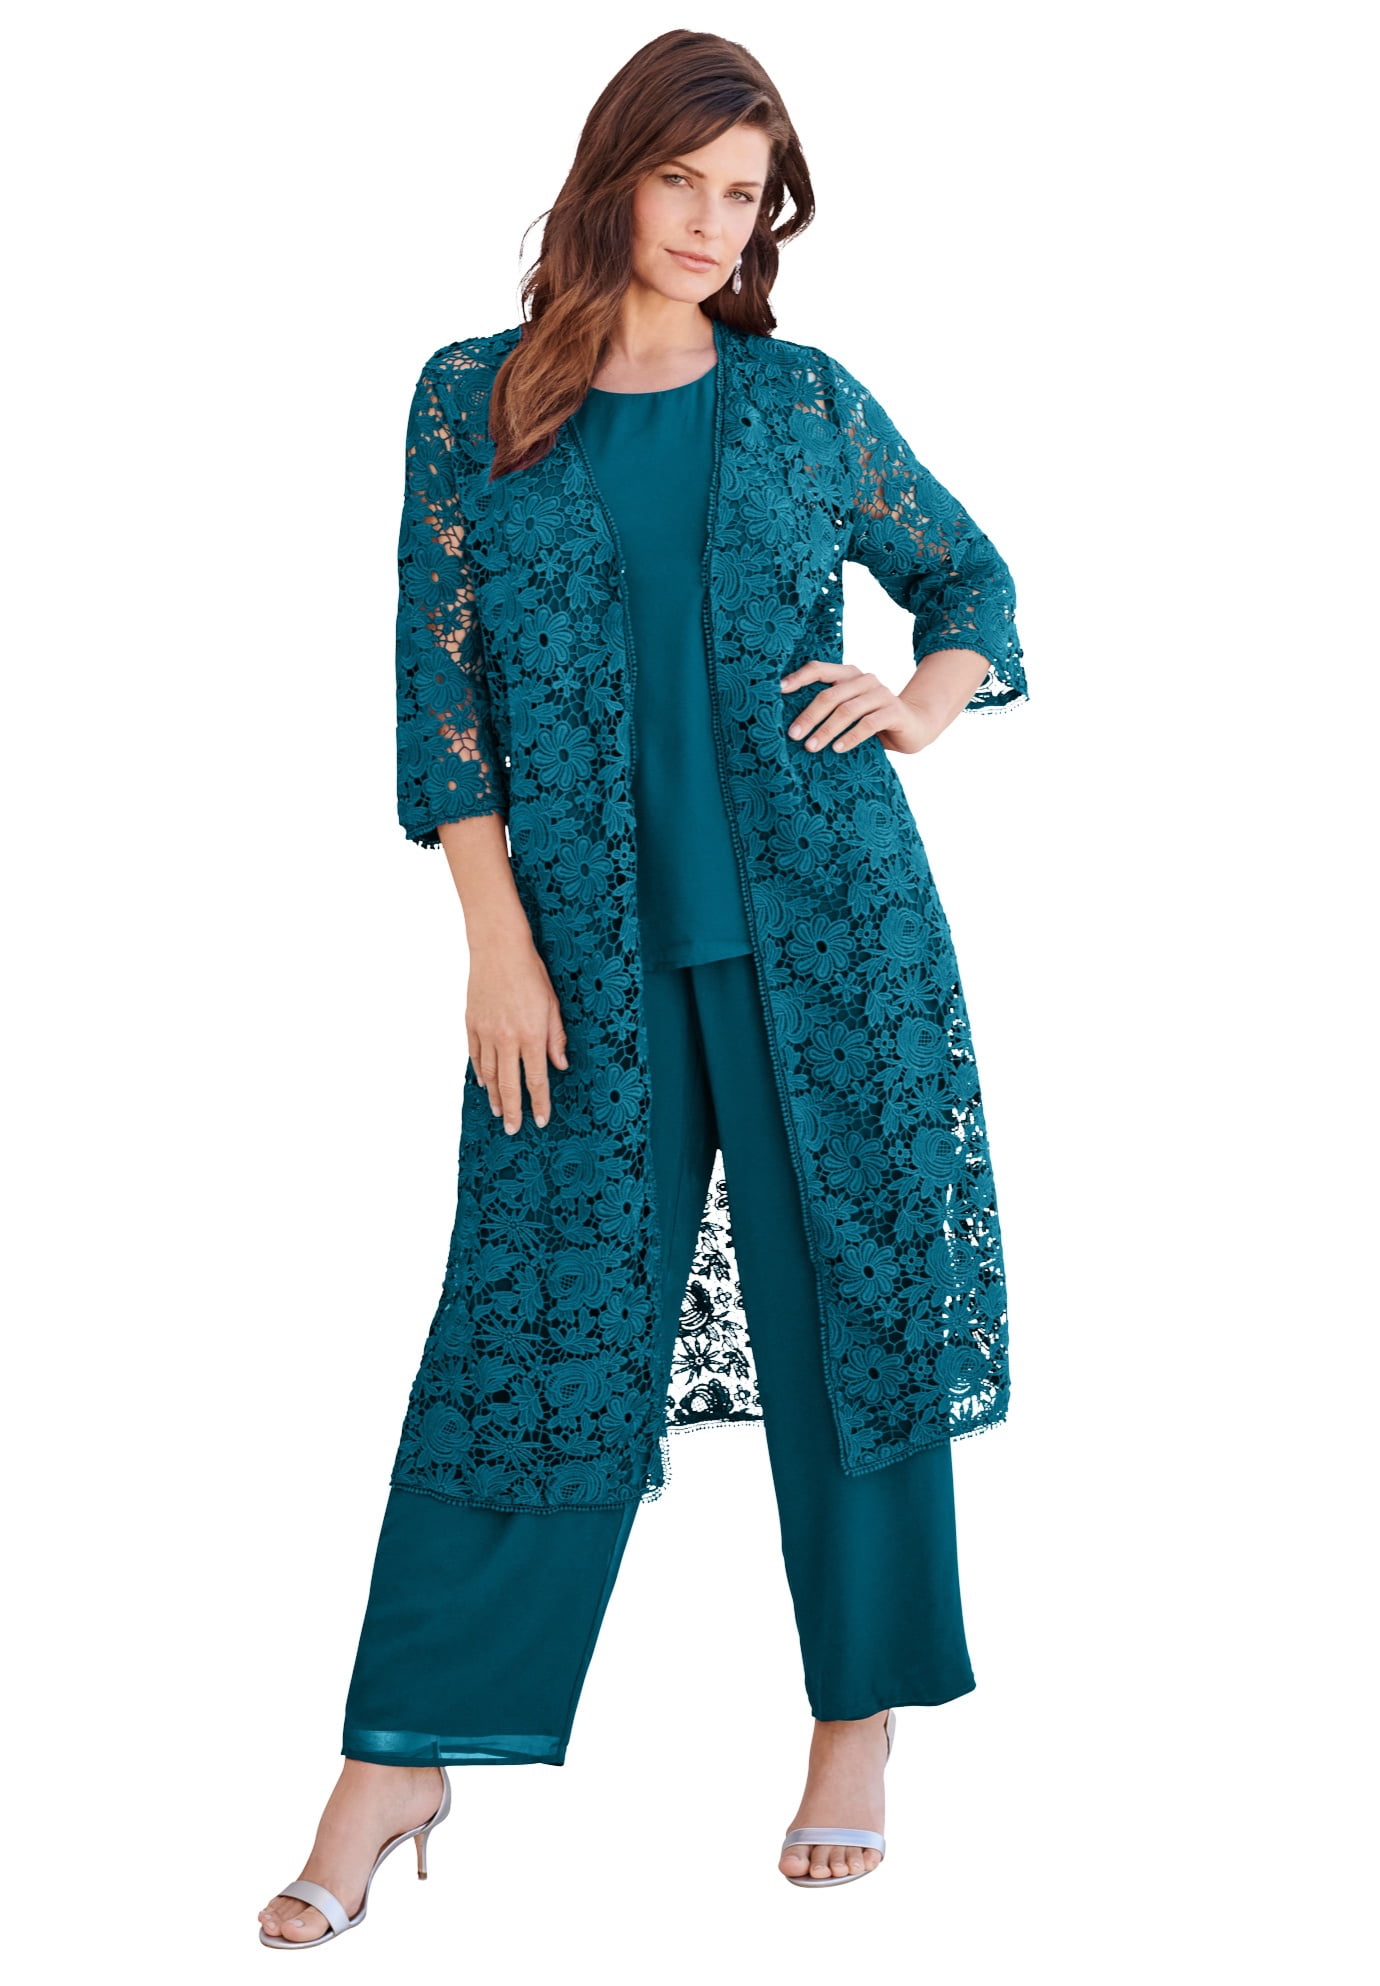 Roamans Womens Plus Size Three-Piece Lace Duster & Pant Set Duster Tank Formal Evening Wide Leg Trousers 